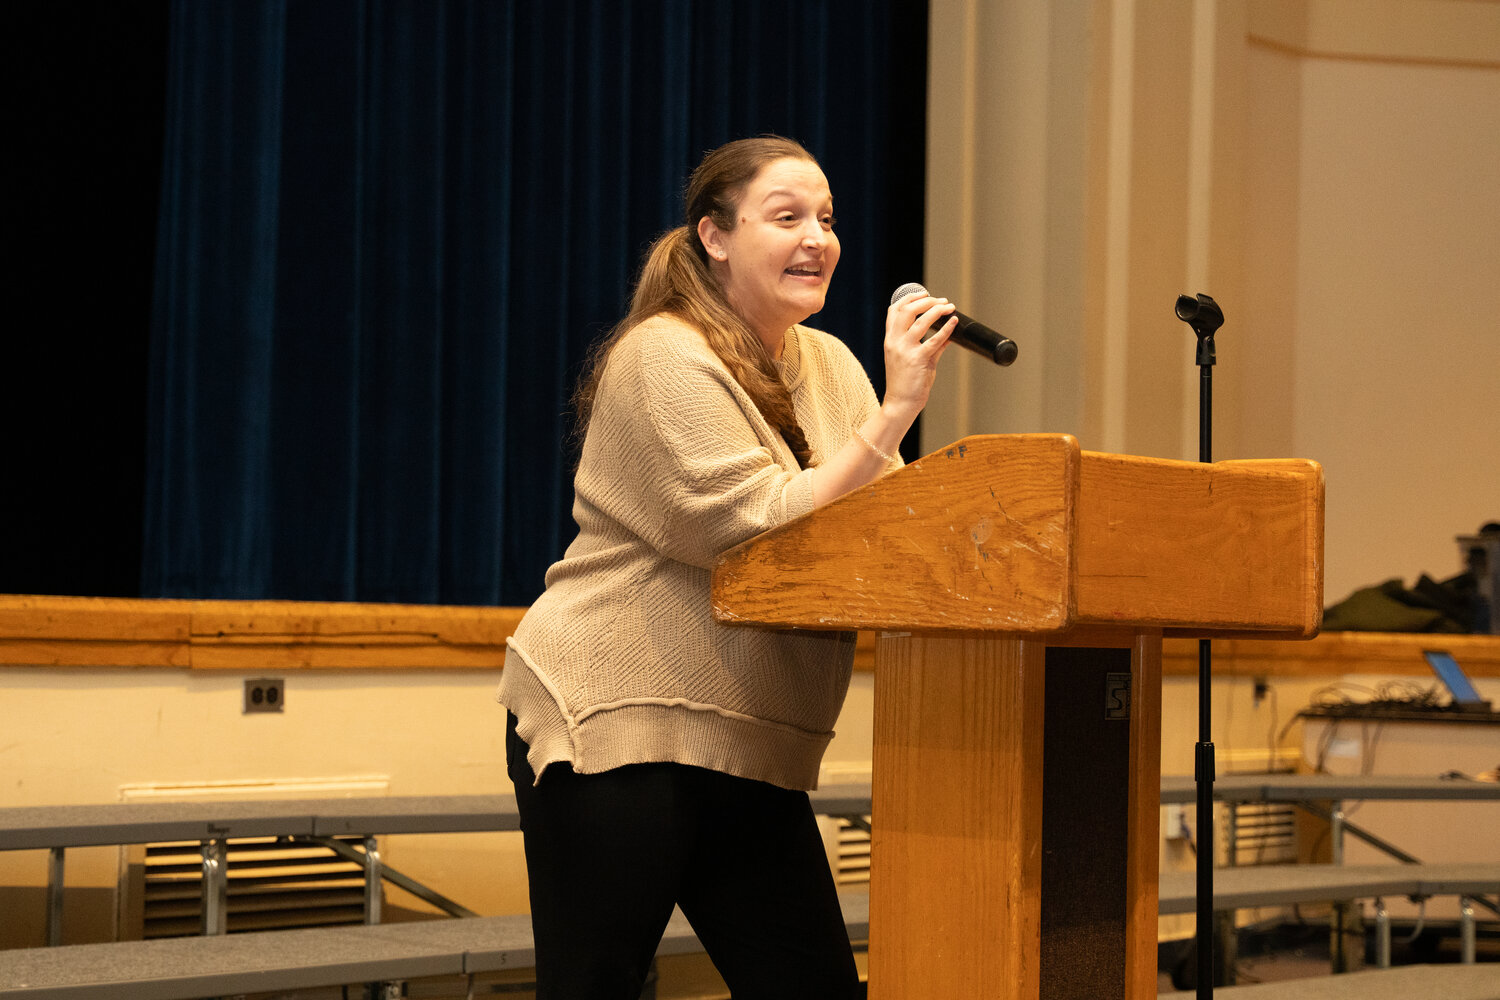 As the project coordinator for the Oceanside SAFE Coalition, Alison Eriksen takes the lead in organizing educational workshops and prevention events like substance abuse prevention workshop night at Oceanside High School.